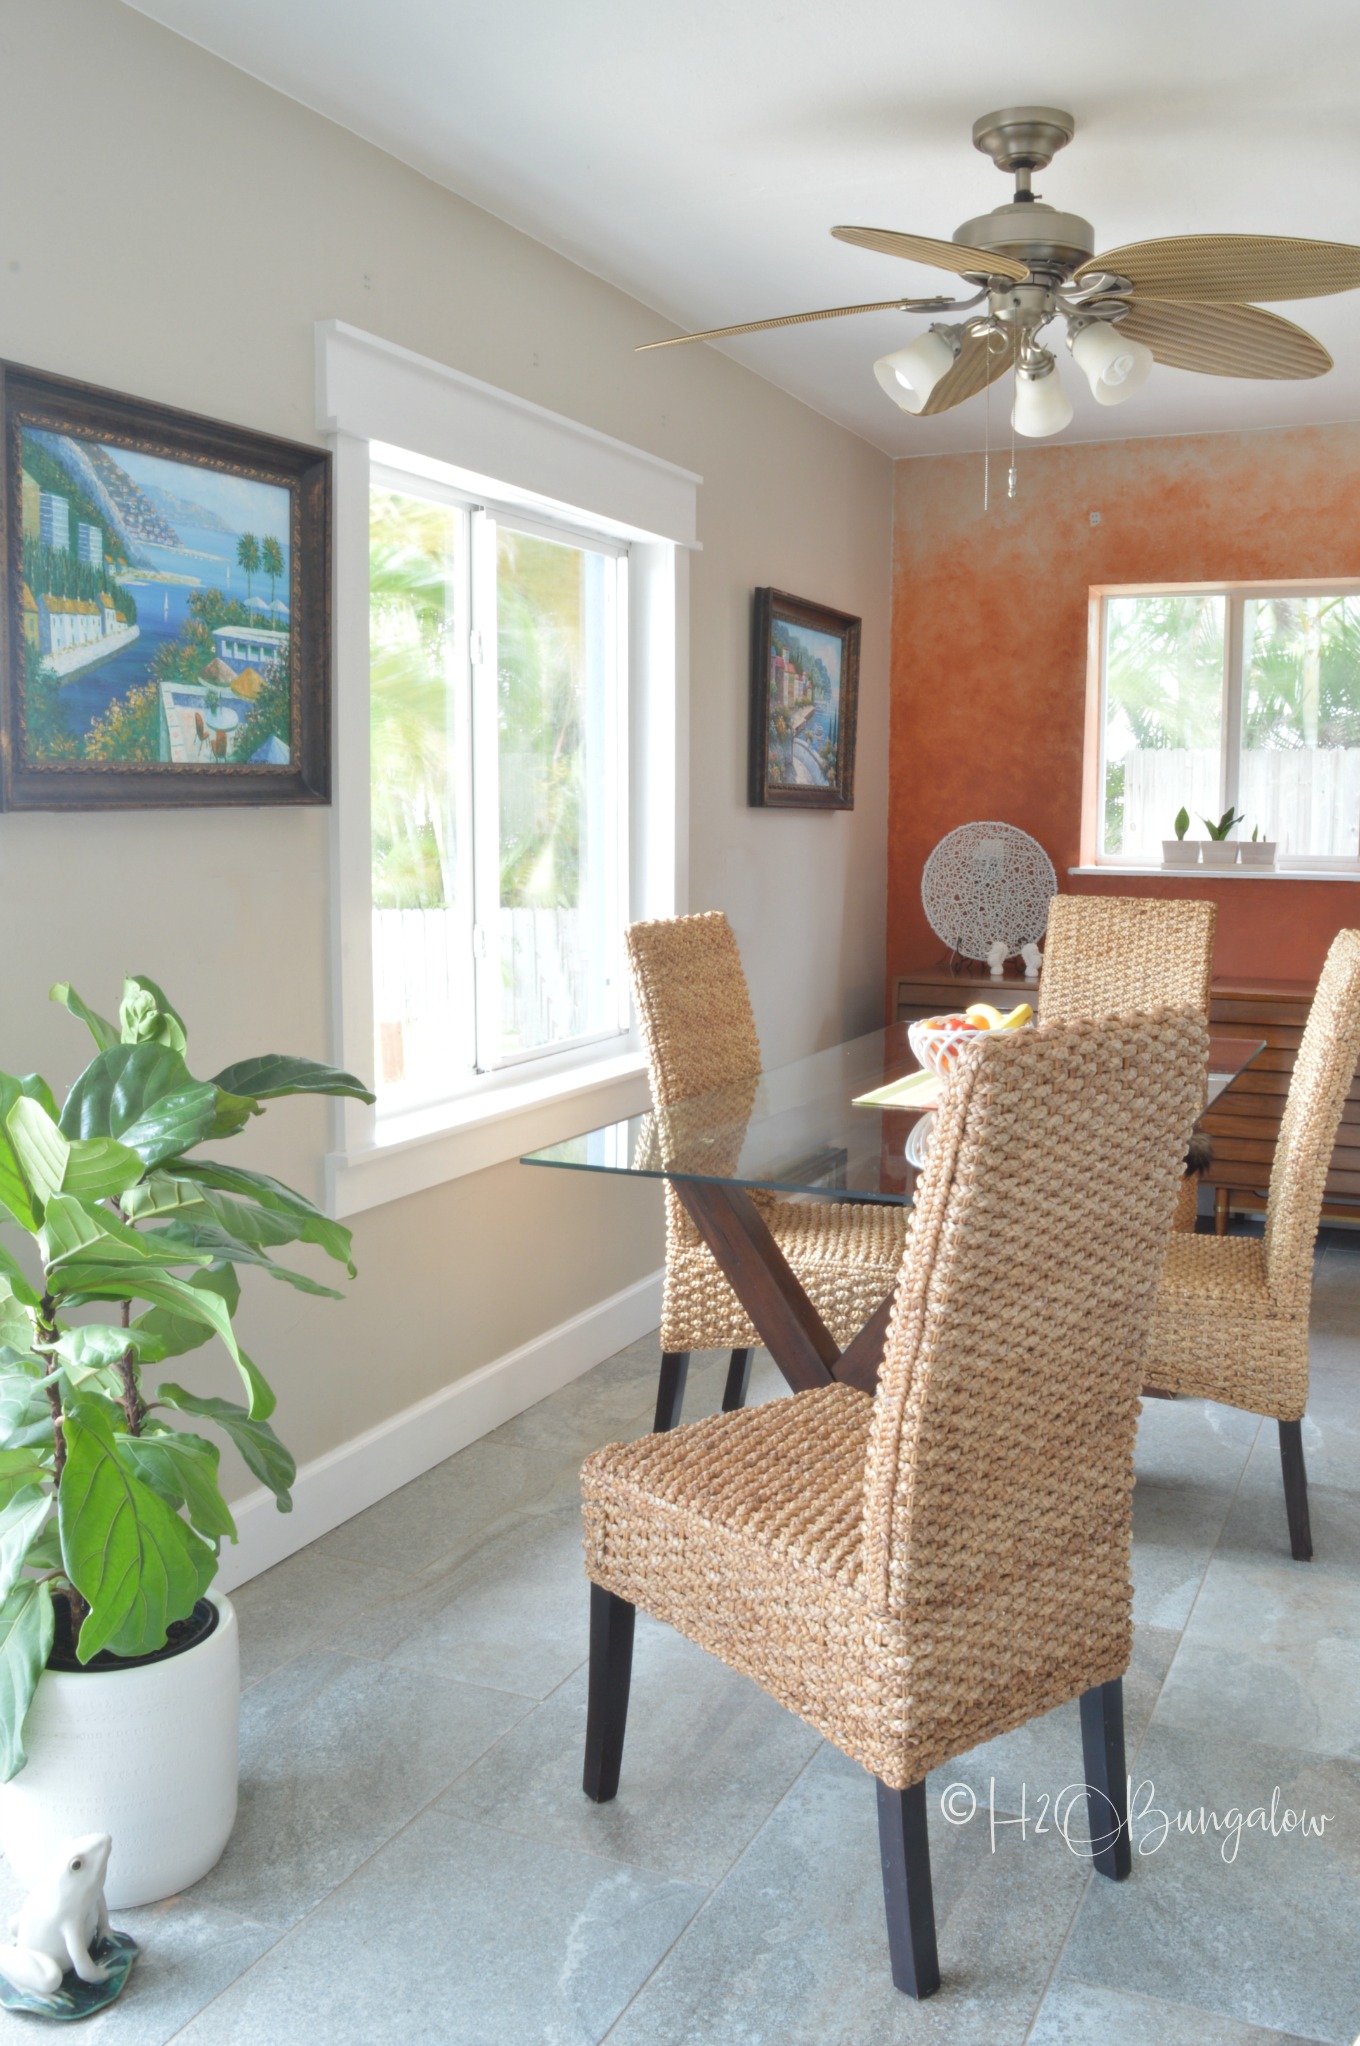 dining room shown with window trim and wicker chairs.